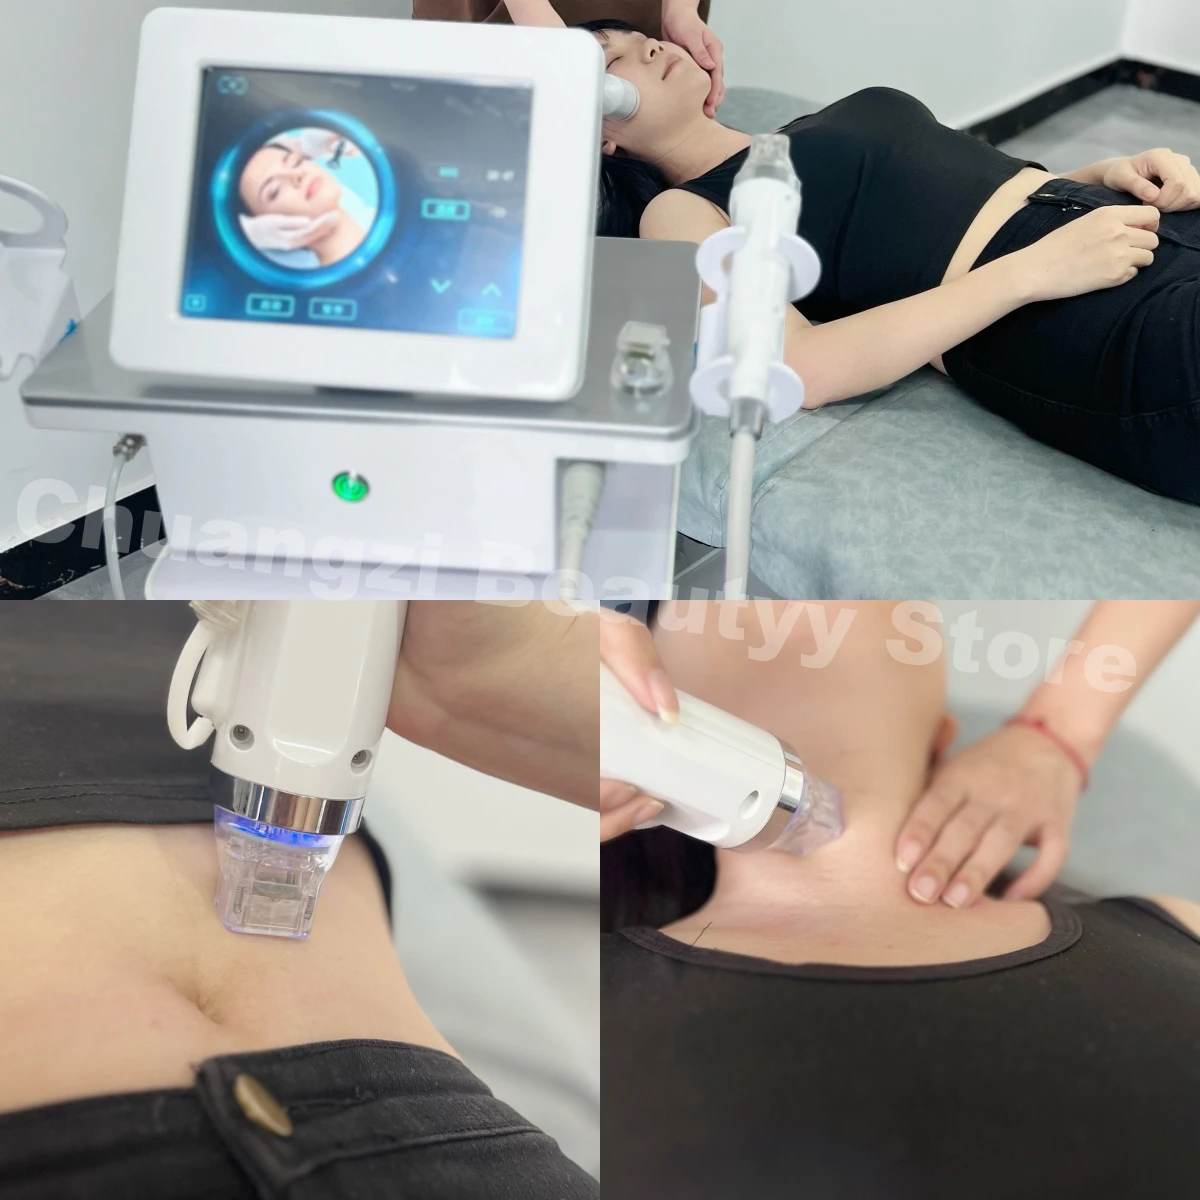 Repair Scar Shrink Pores Fade Scars Firming Tira Skin Beauty Instrument Machine Scar Removal